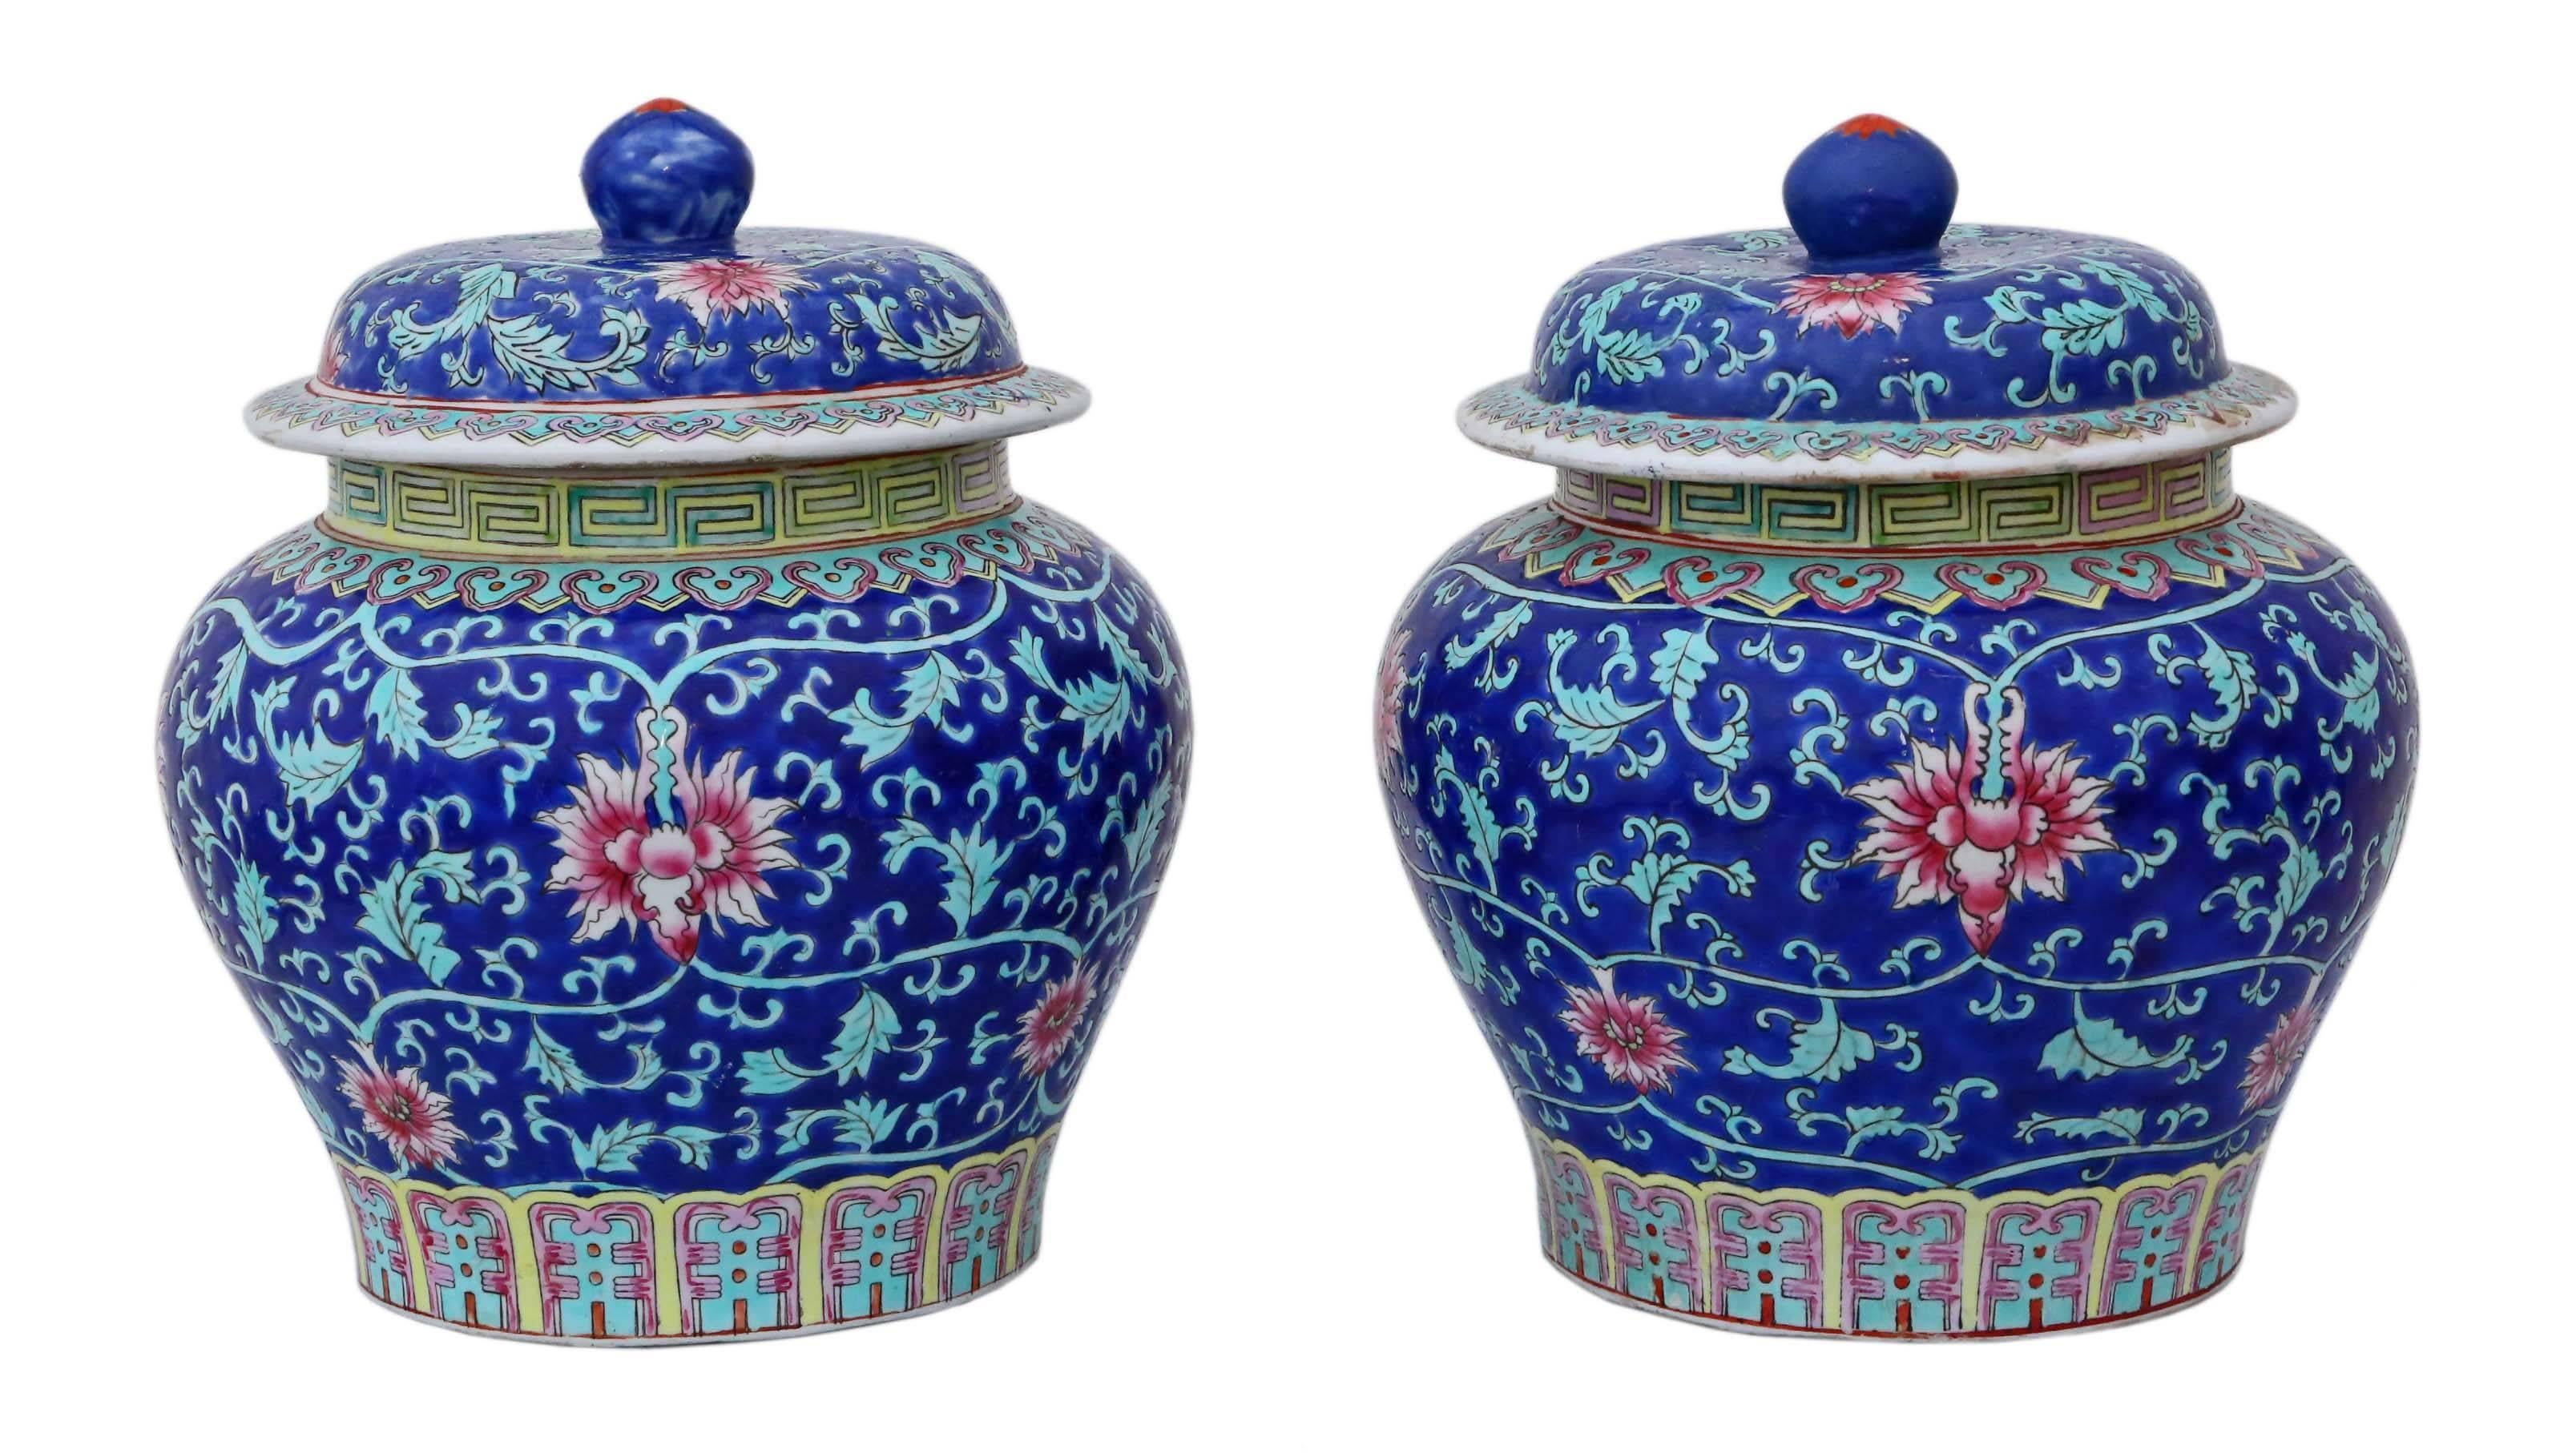 Antique Large Pair of Chinese Republic Period Jars with Lids Ginger Vases In Excellent Condition For Sale In Wisbech, Walton Wisbech